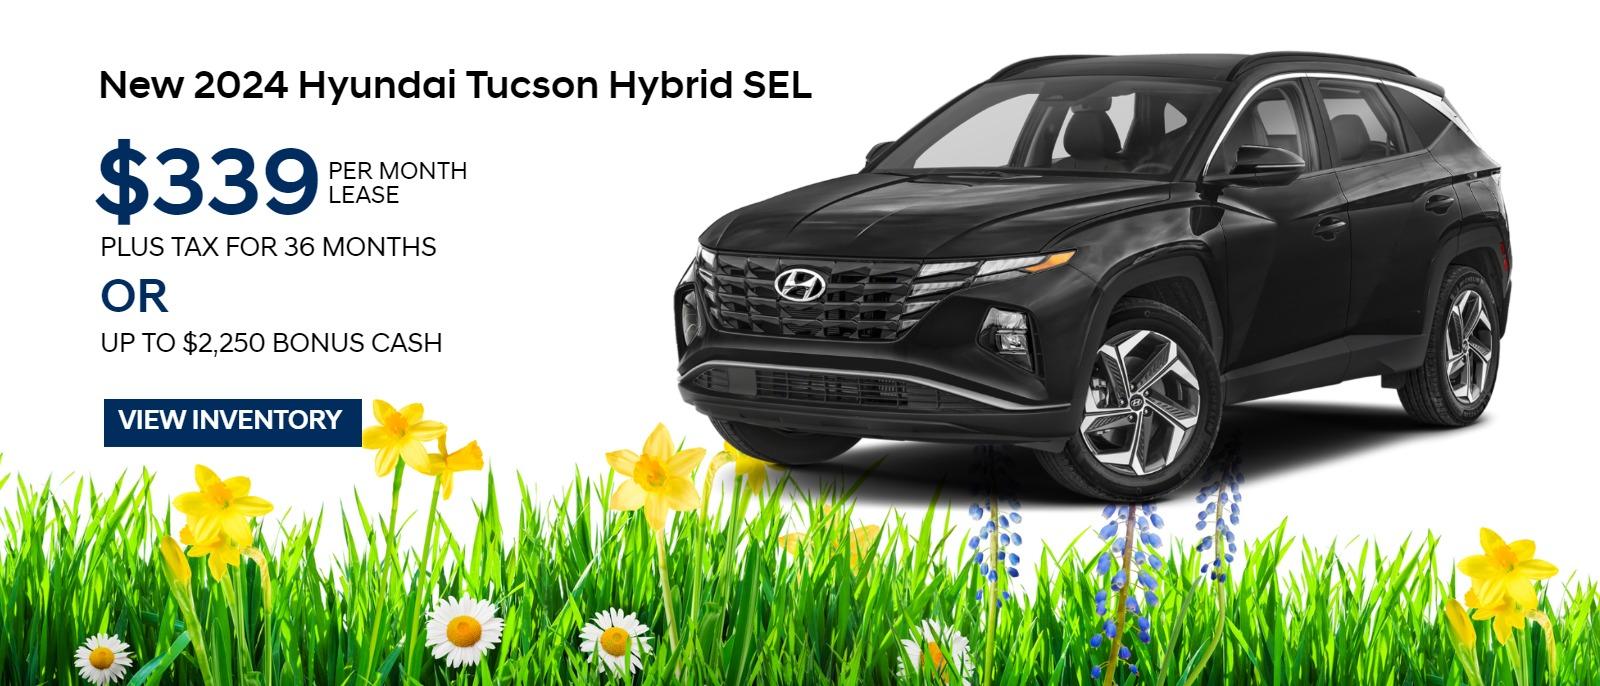 New 2024 Hyundai Tucson Hybrid SEL
$339/Mo. Lease + tax for 36 months*
OR up to $2,250 Bonus Cash